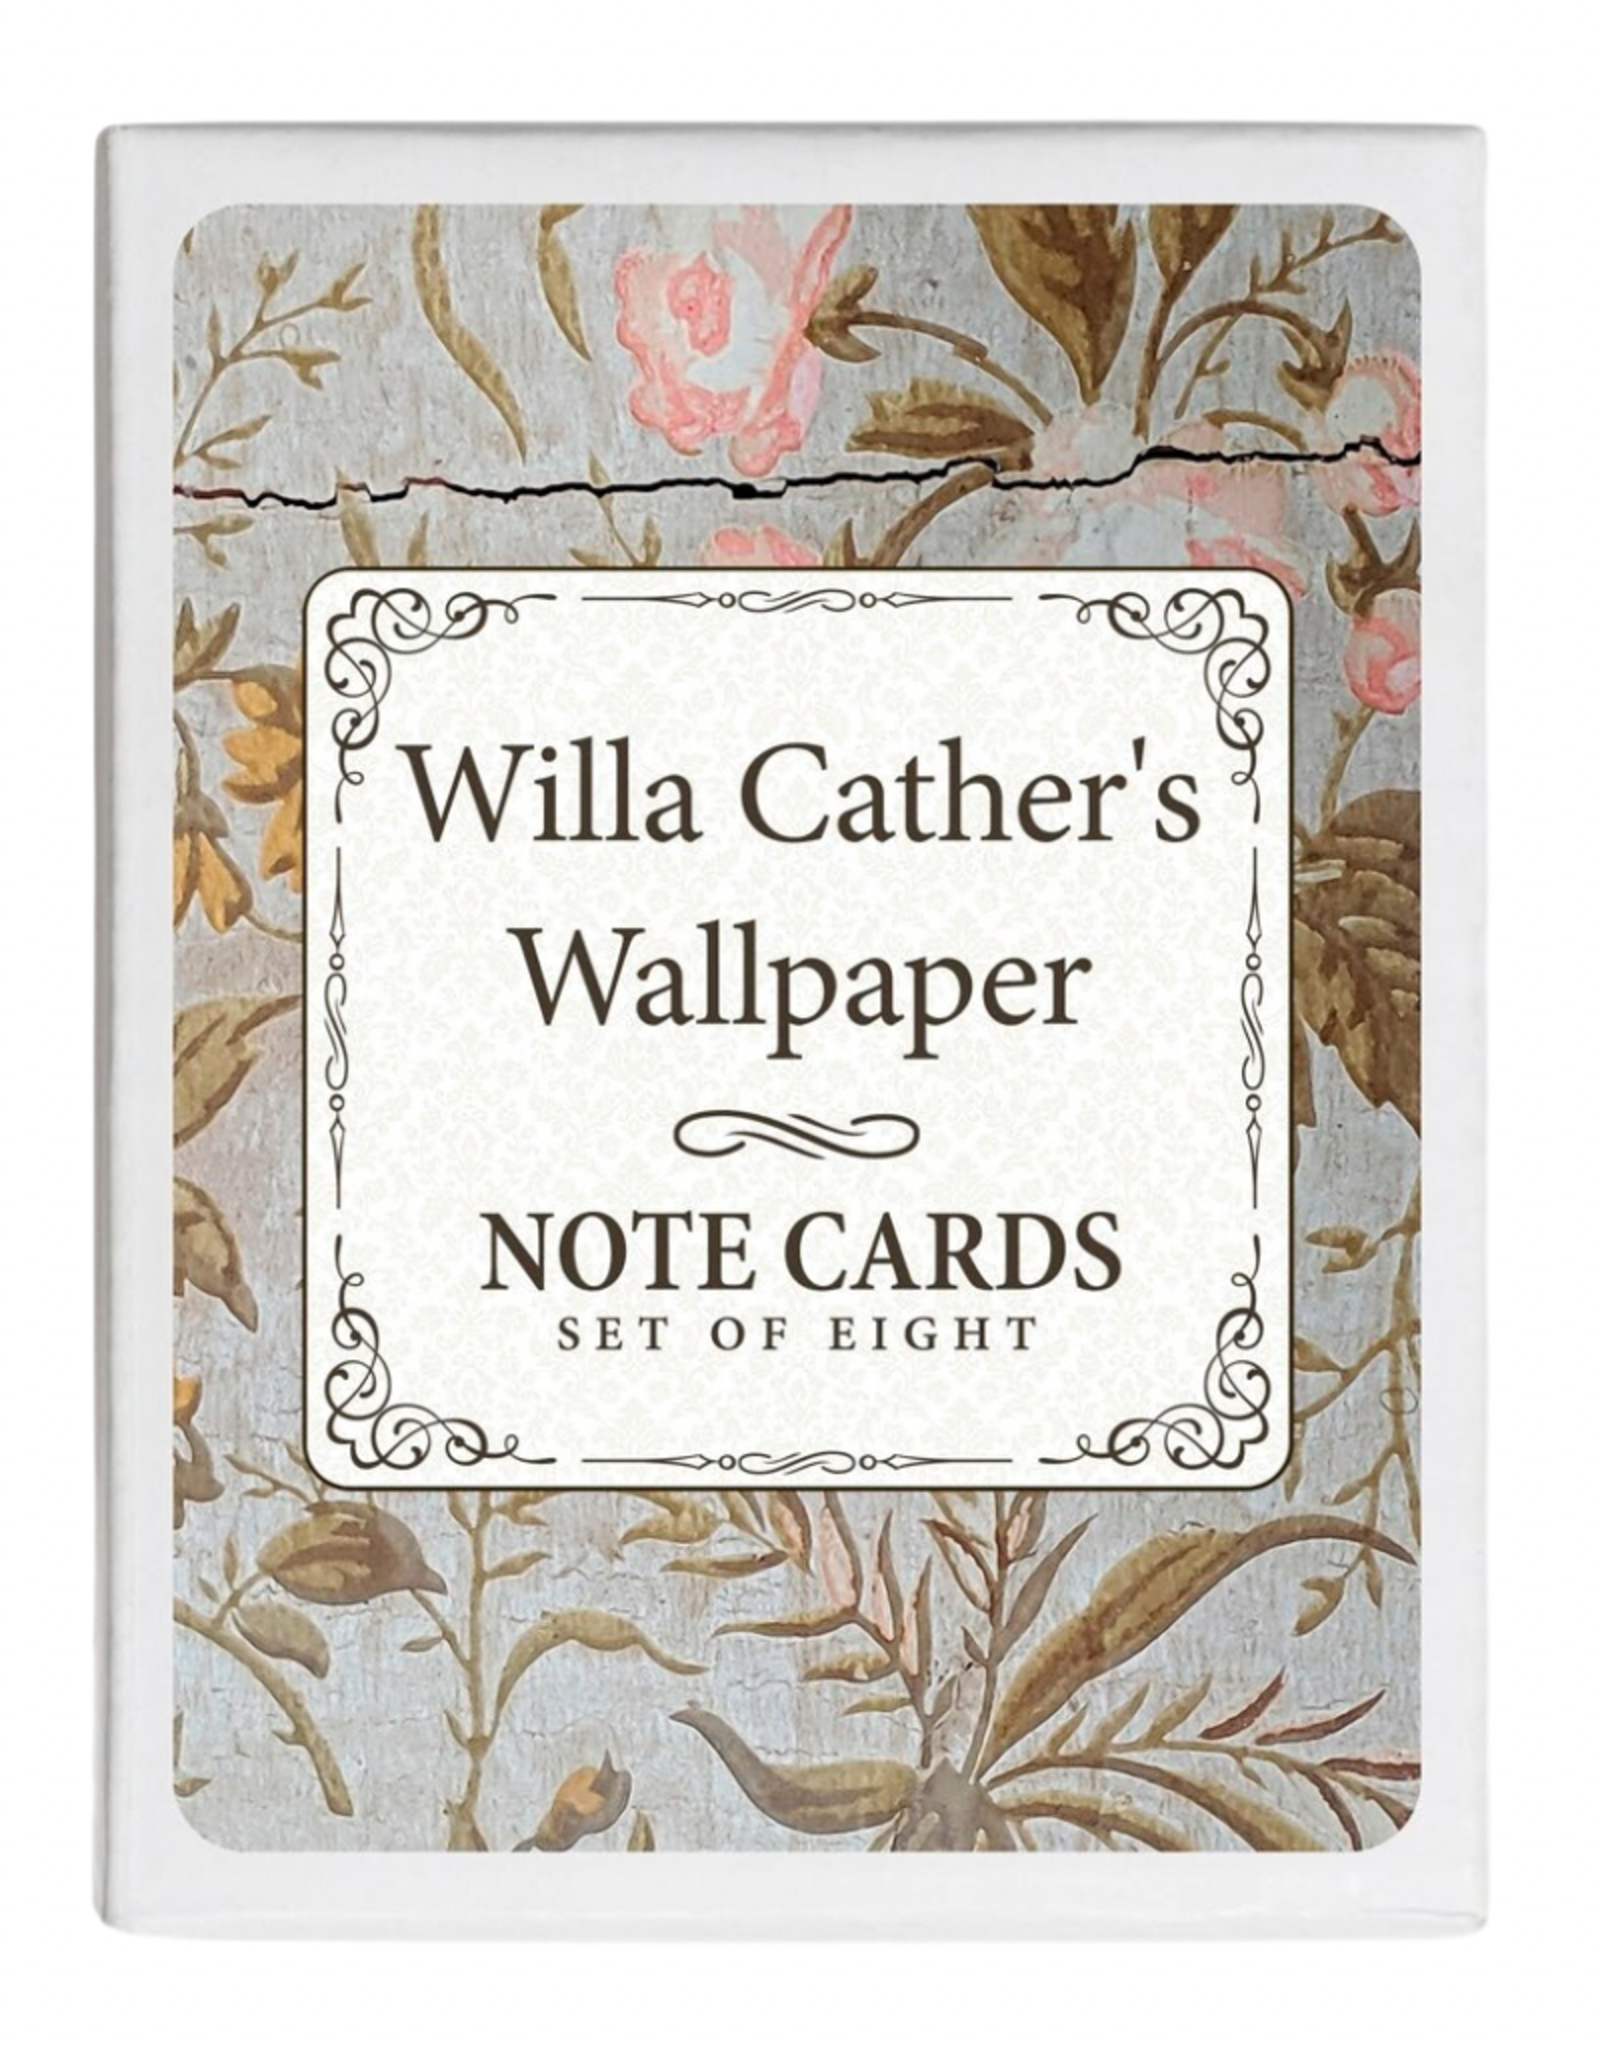 Boxed Set of 8 Wallpaper Note Cards